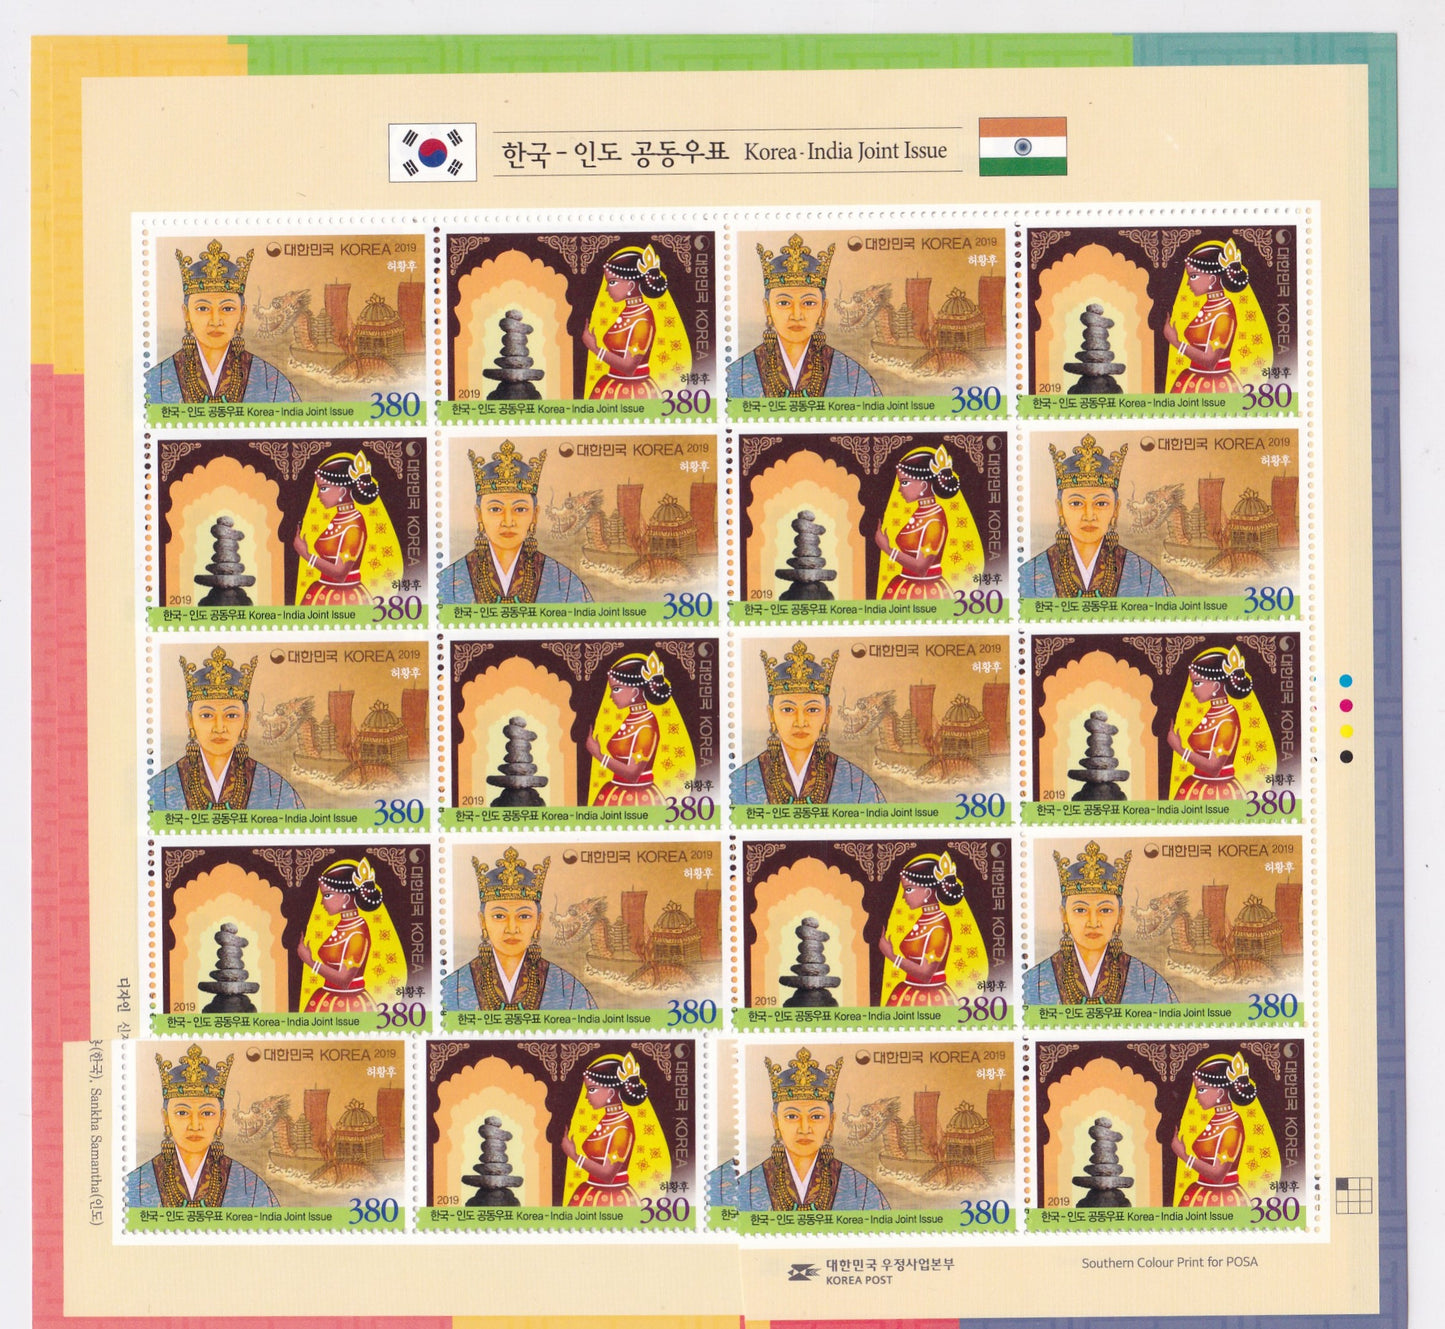 Korea-India  joint issue 2019 full sheetlet of 20 stamps